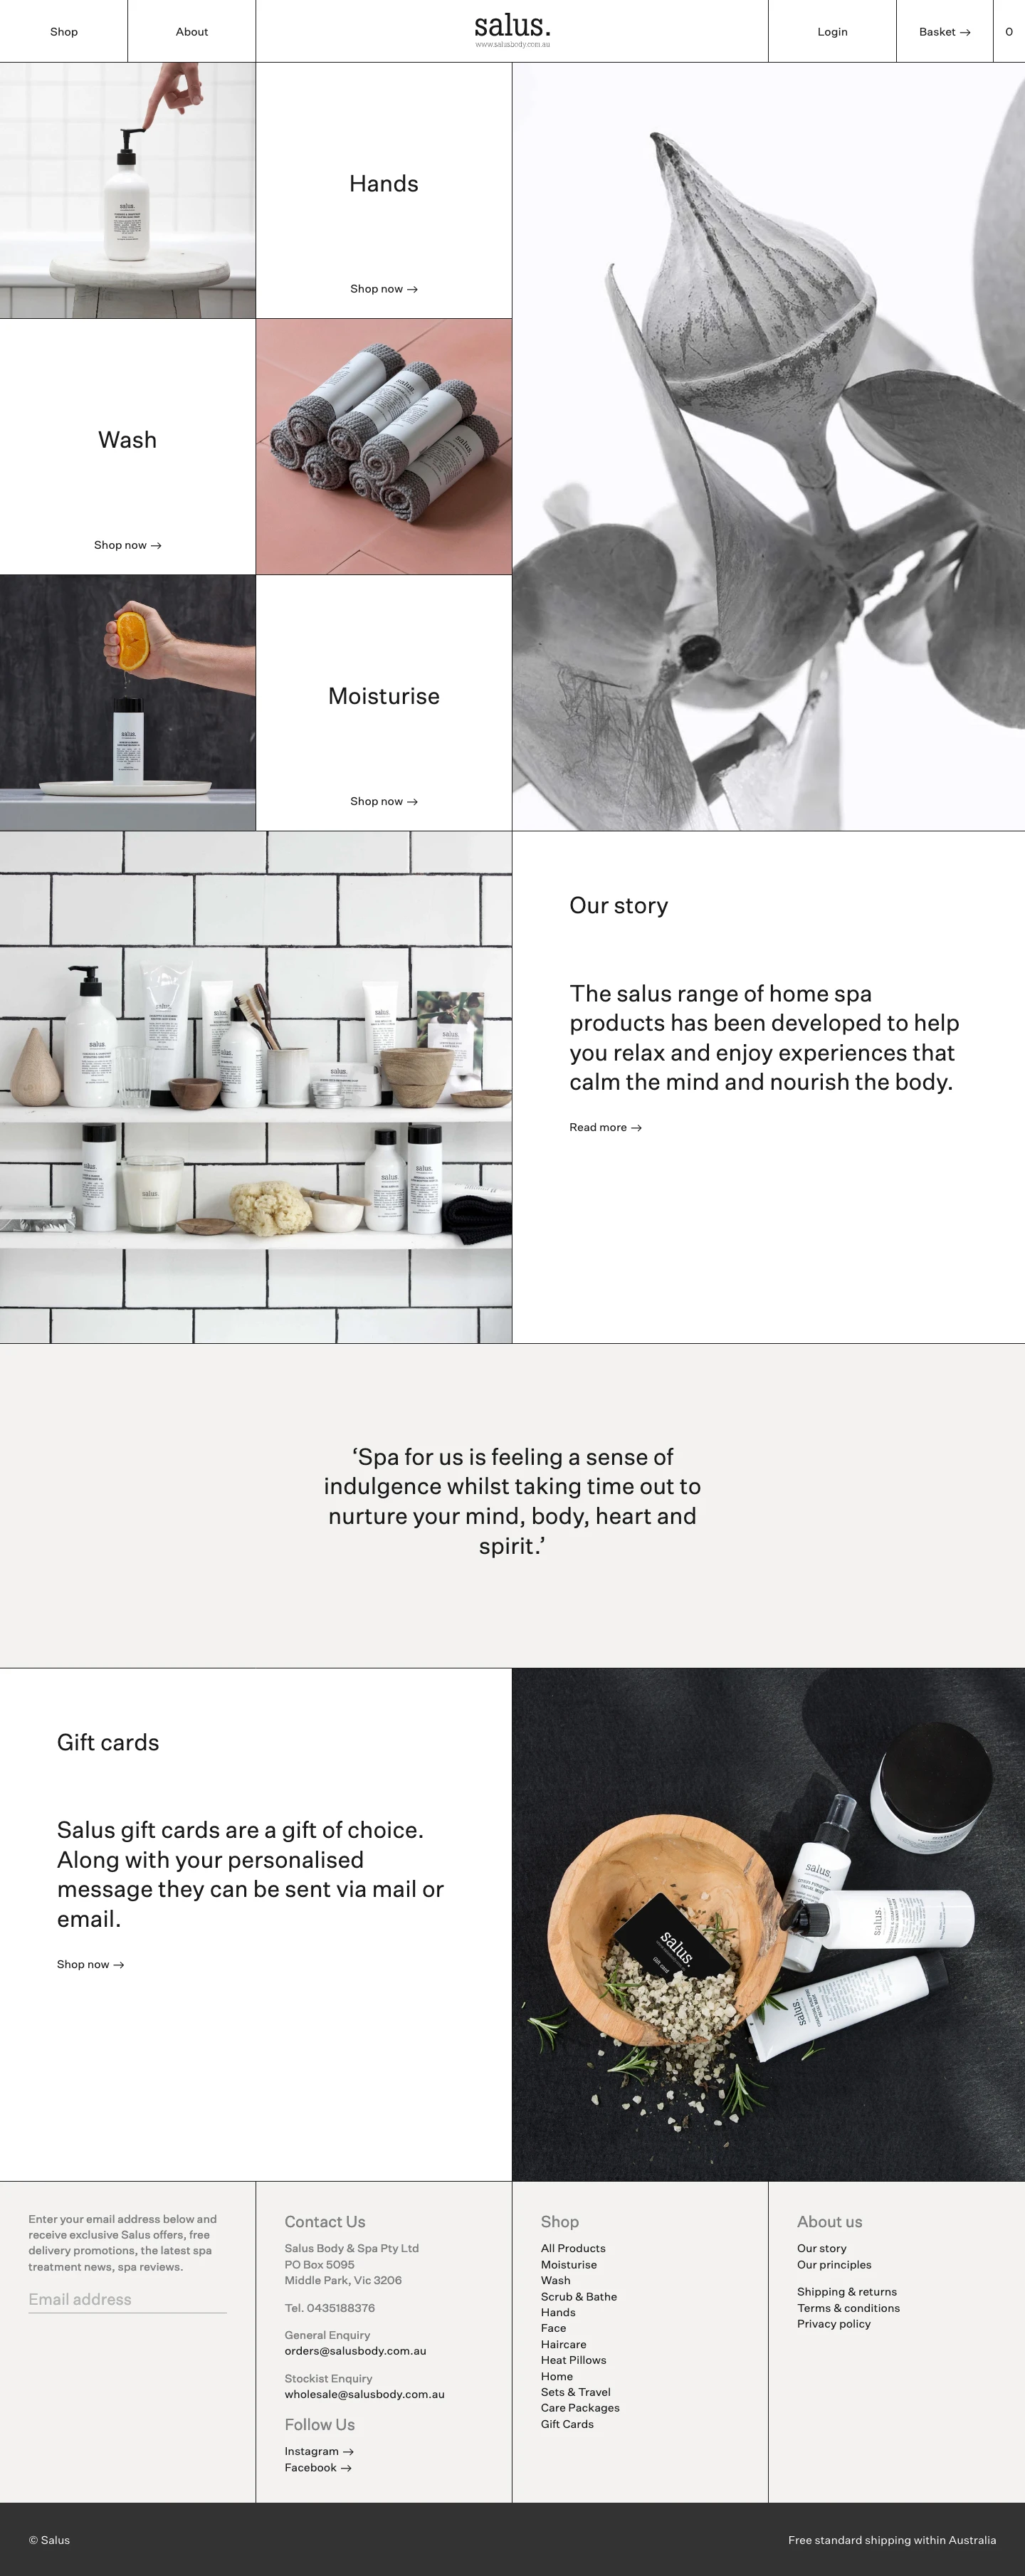 Salus Body Landing Page Example: Salus Body products are made in Australia using natural plant extracts, powerful botanicals and 100% pure essential oils.